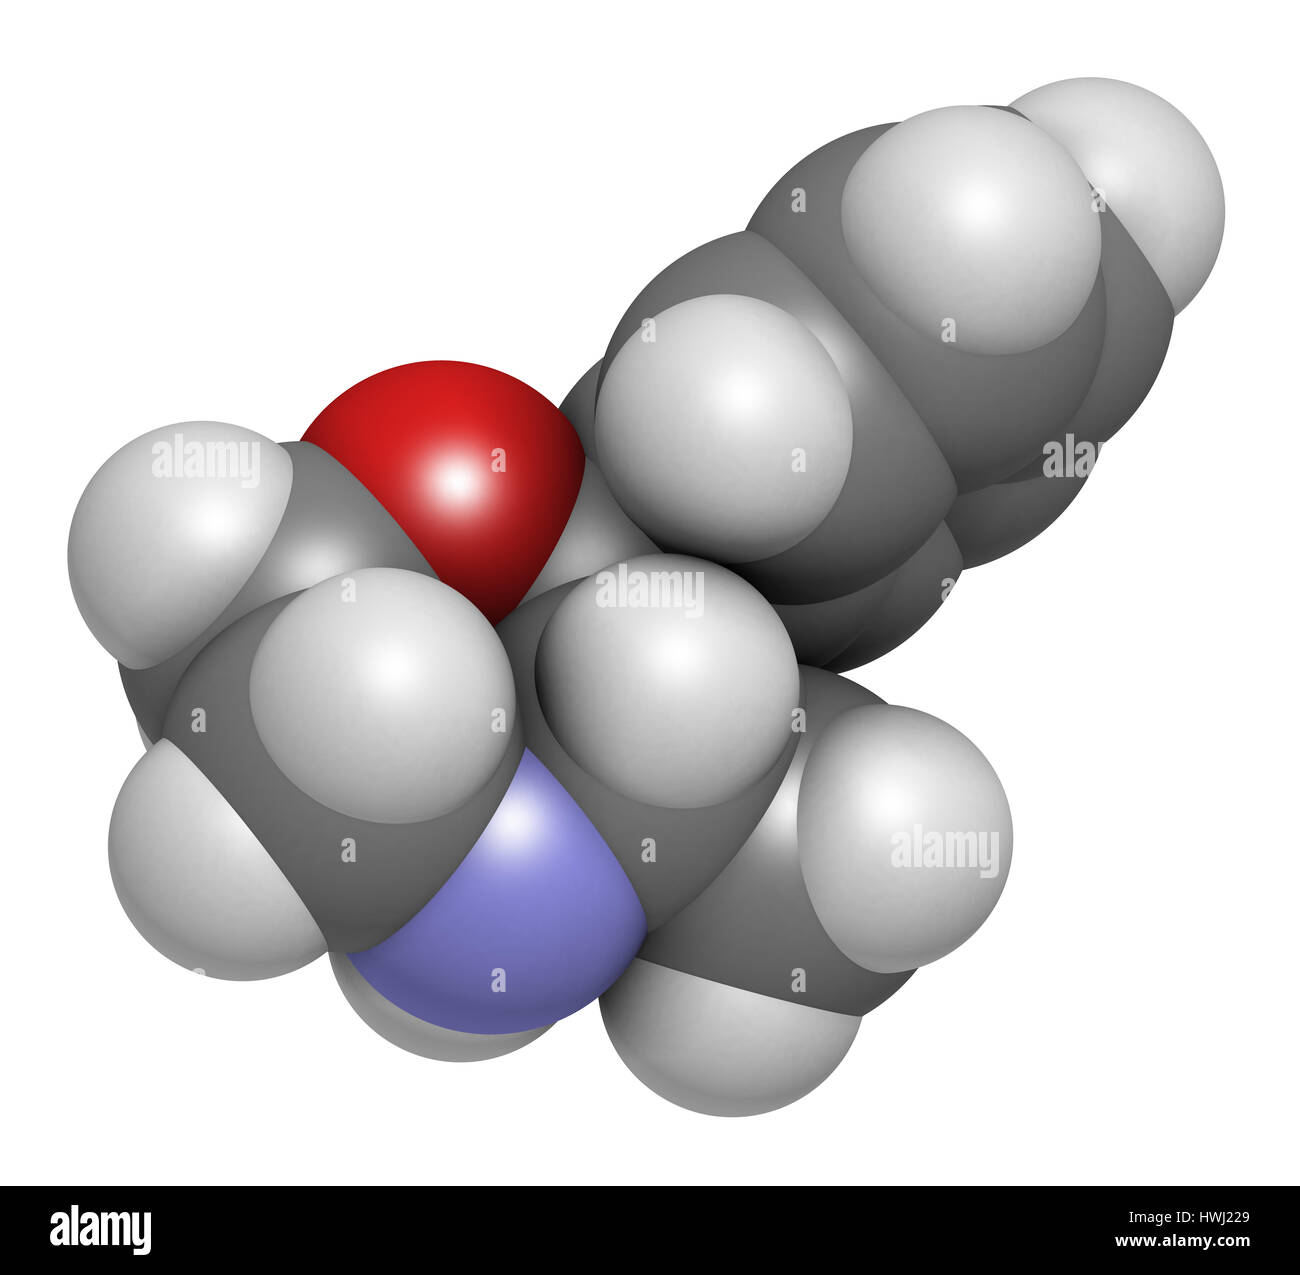 Phenmetrazine stimulant drug molecule (amphetamine class). Used as stimulant and appetite suppressant.  Atoms are represented as spheres with conventi Stock Photo